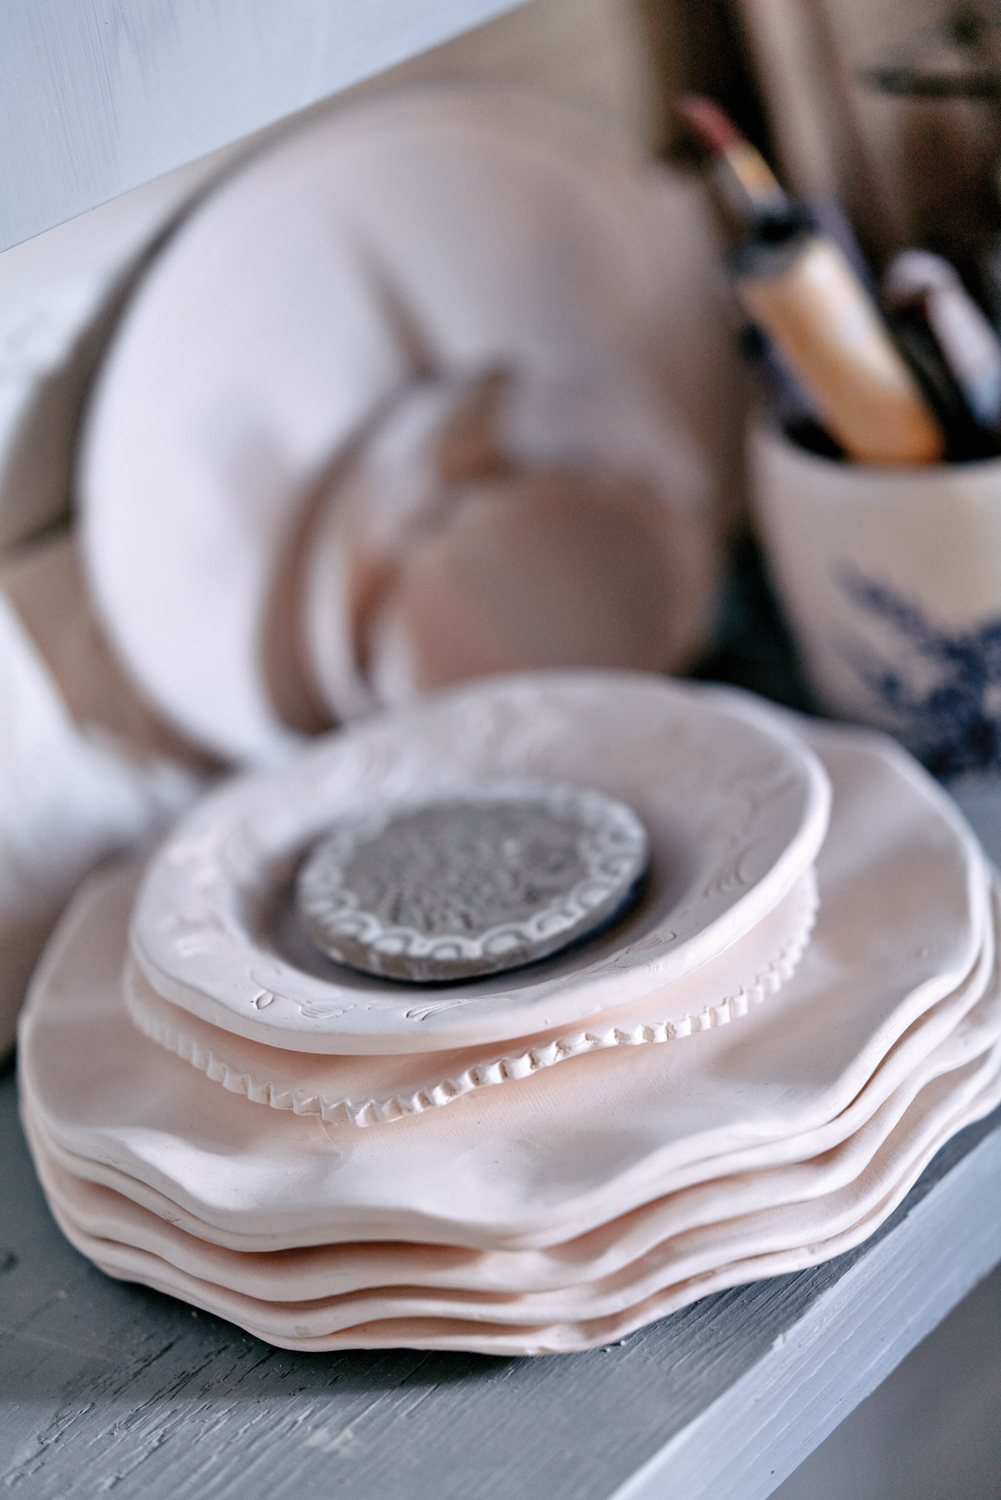 A stack of unfired ceramic plates with ruffles and small details along the edges by Maryfrances Carter